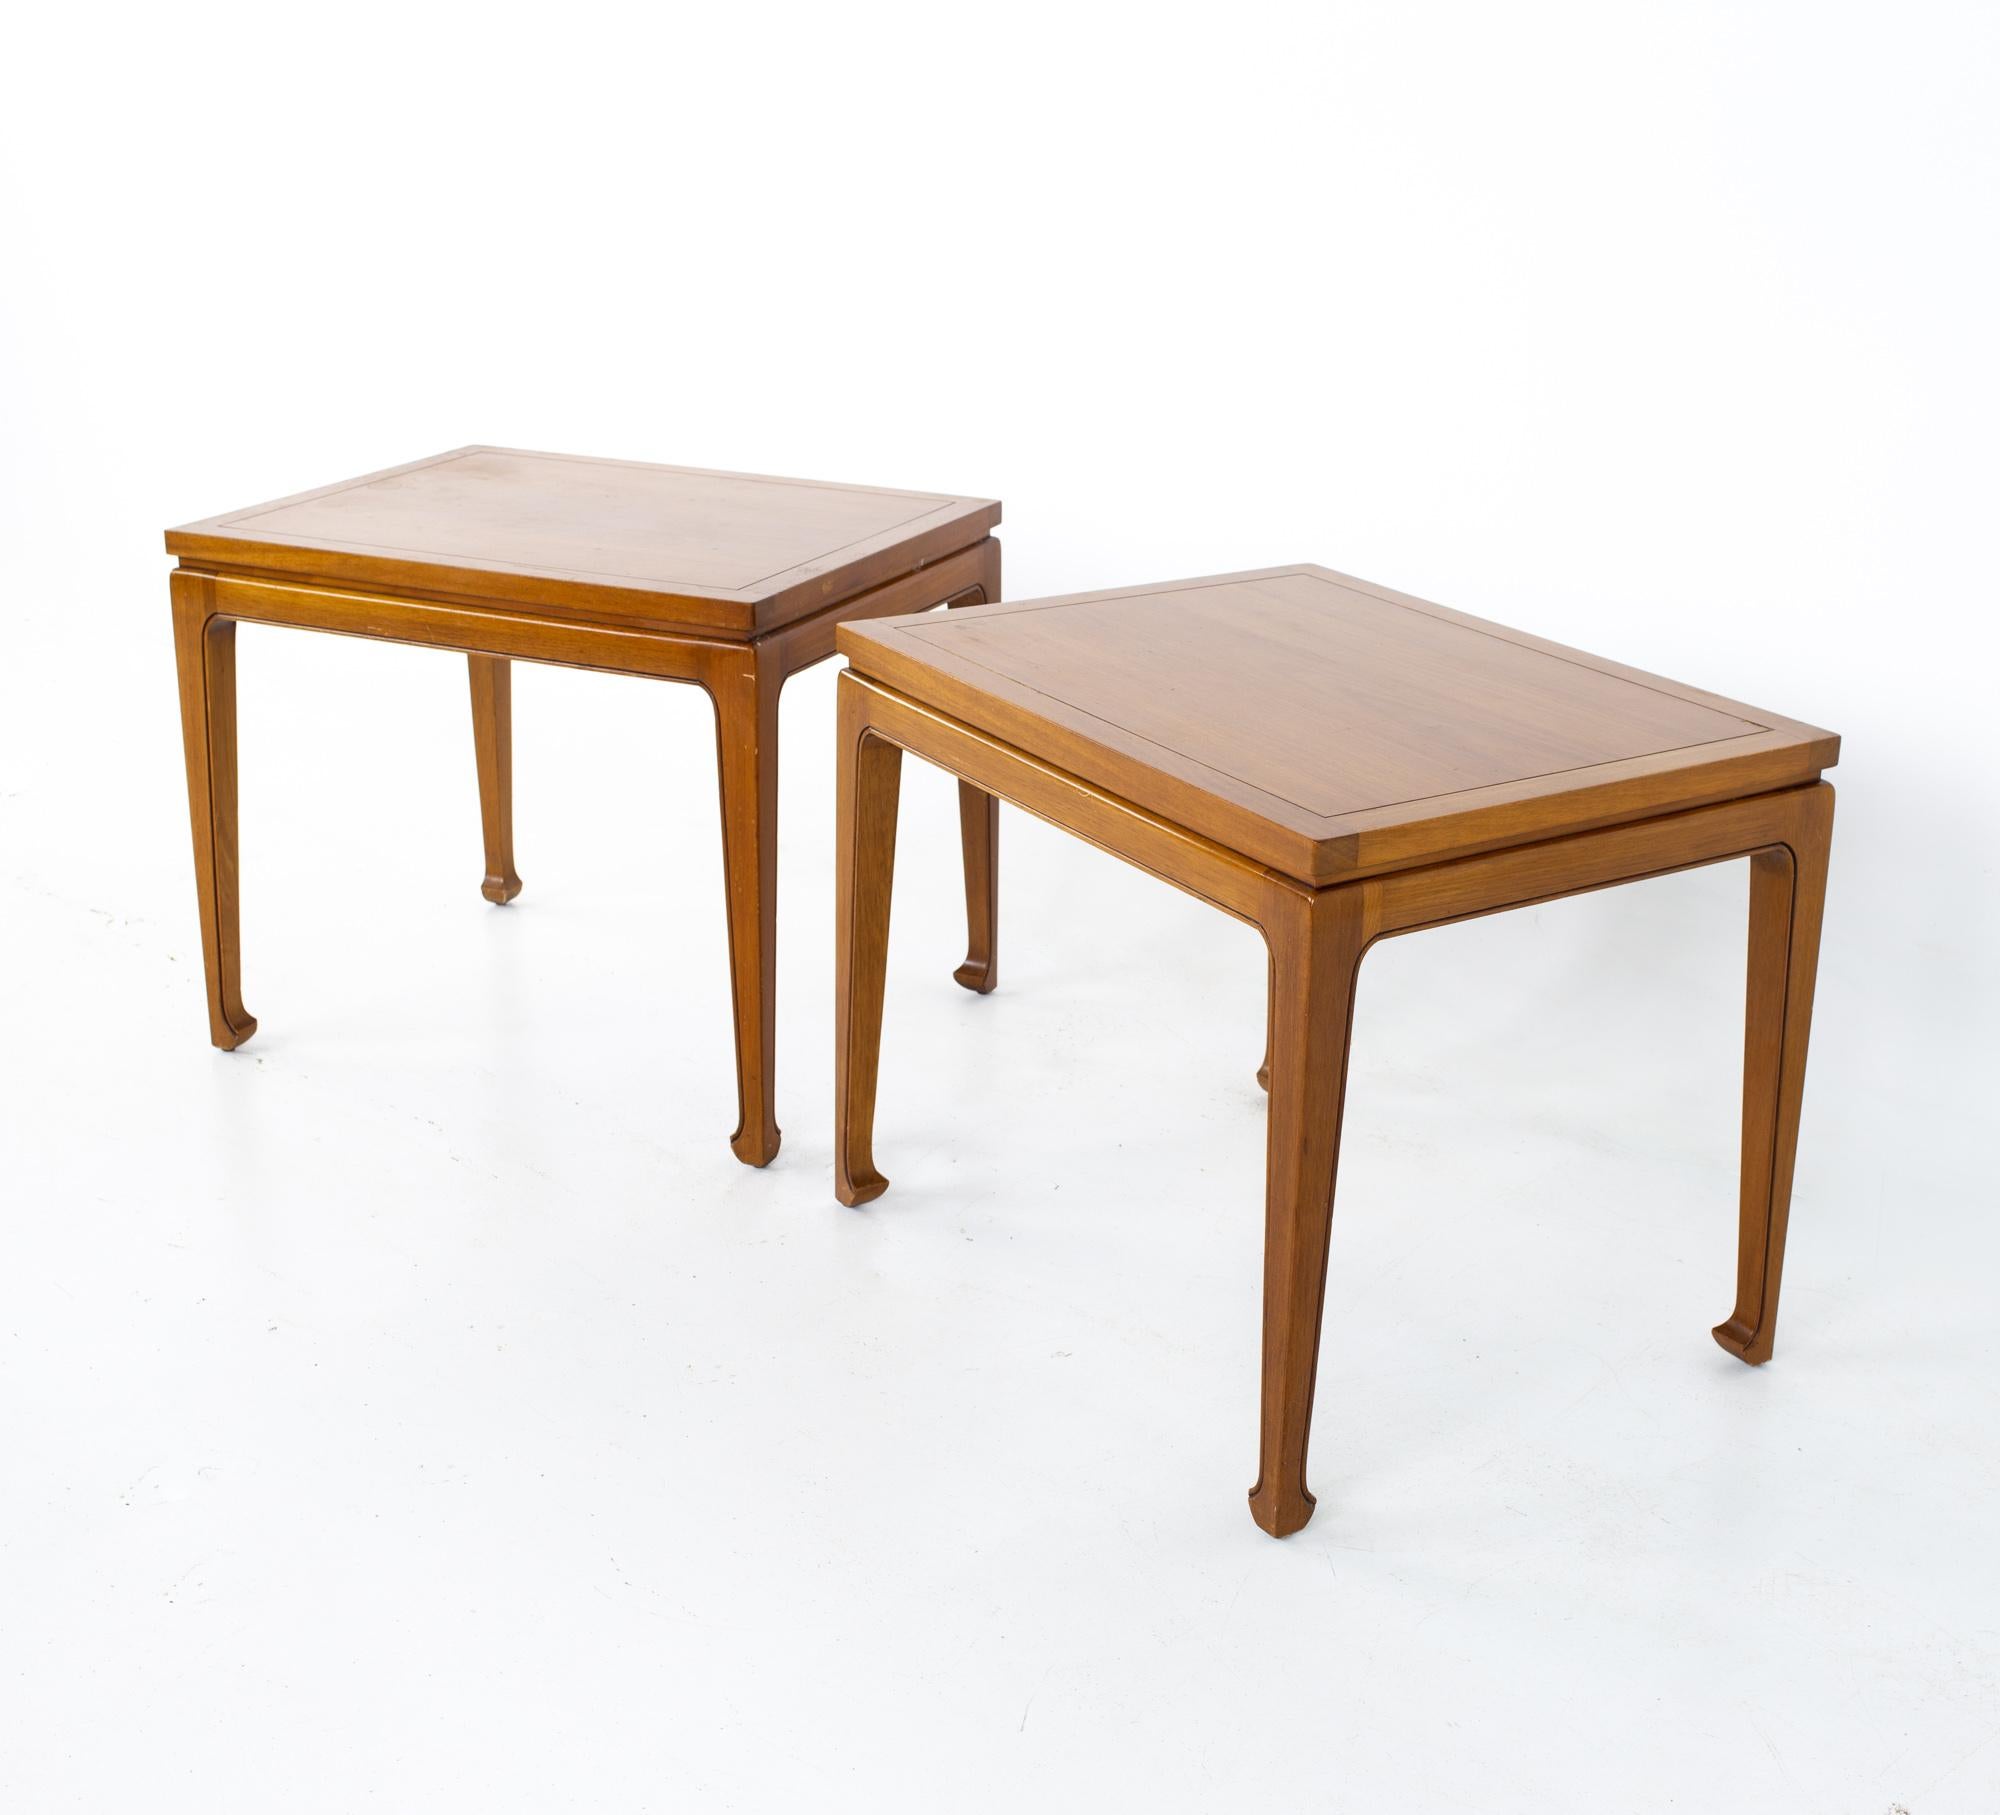 Lane Rhythm style fine arts furniture company mid century walnut side end tables - a pair
Each table measures: 27 wide x 21 deep x 22.25 inches high

All pieces of furniture can be had in what we call restored vintage condition. That means the